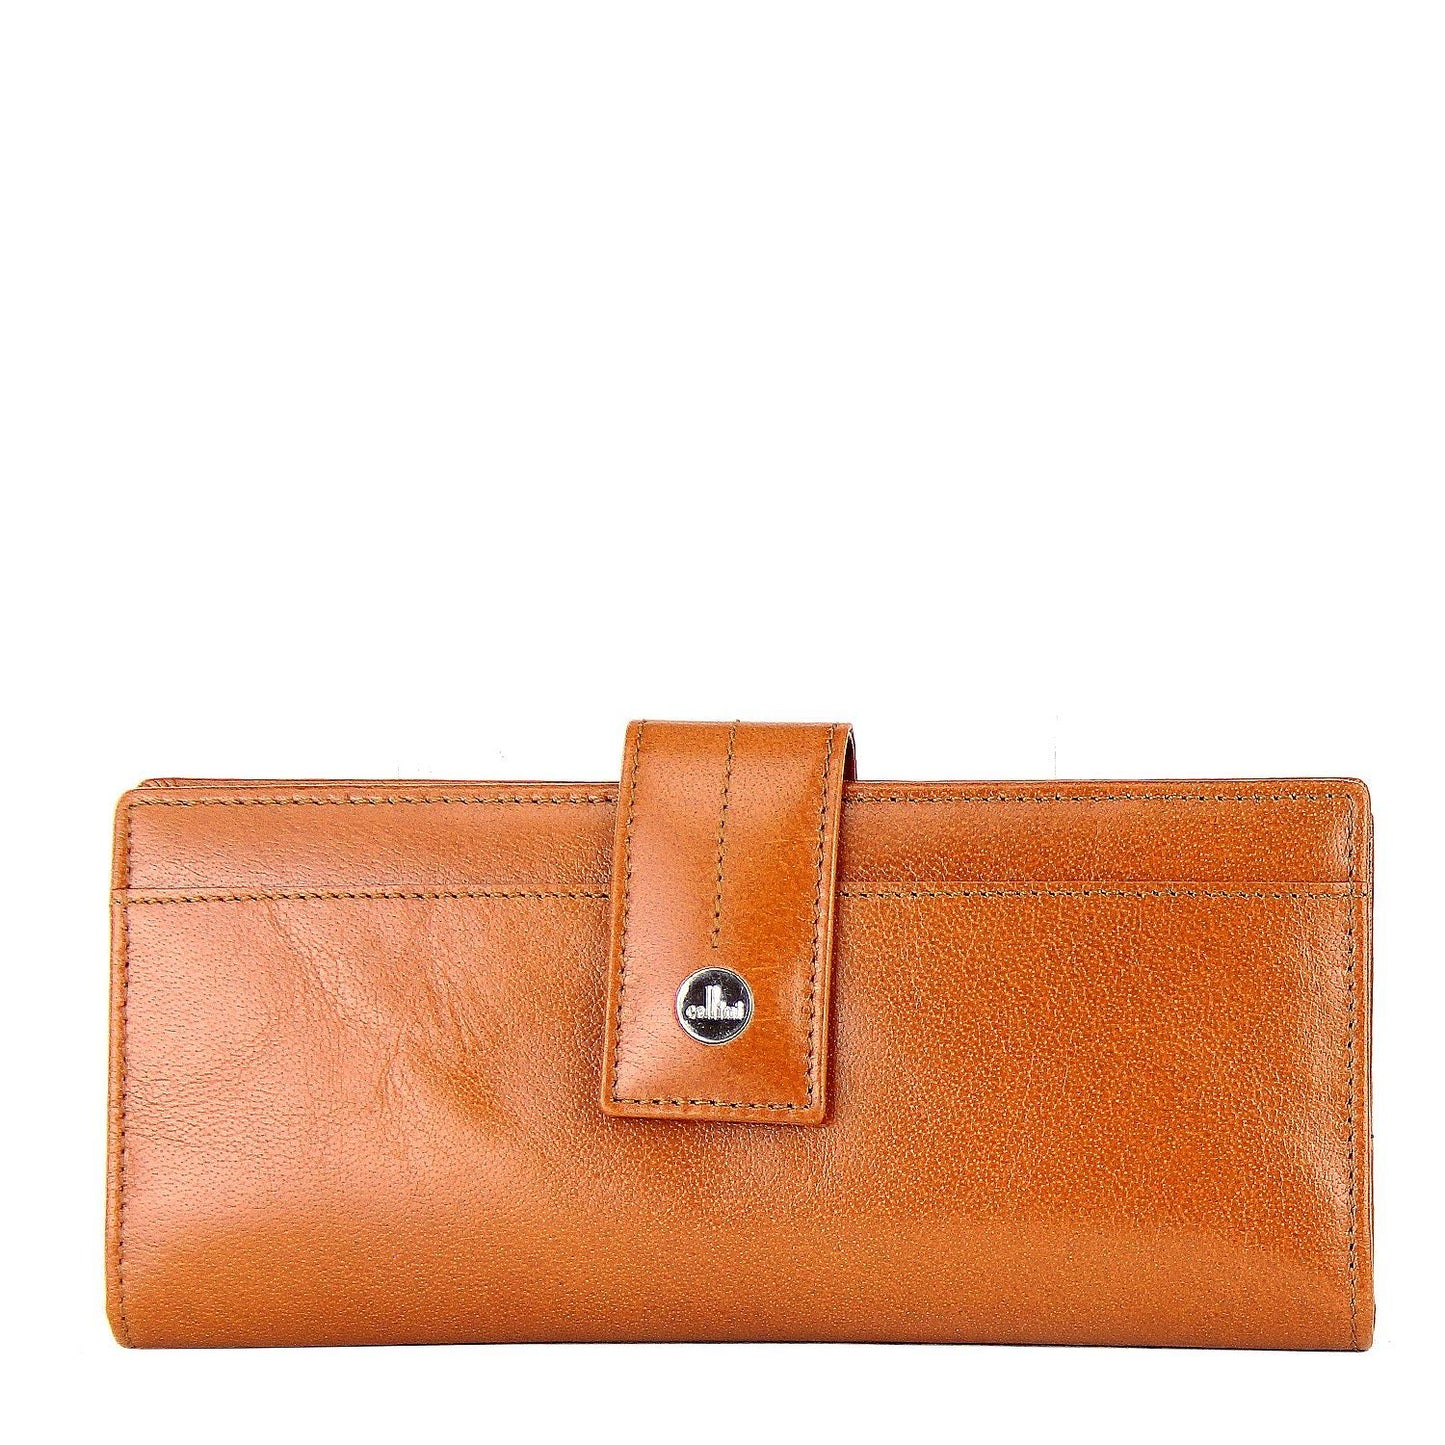 Cellini - Petra Trifold Wallet - rainbowbags